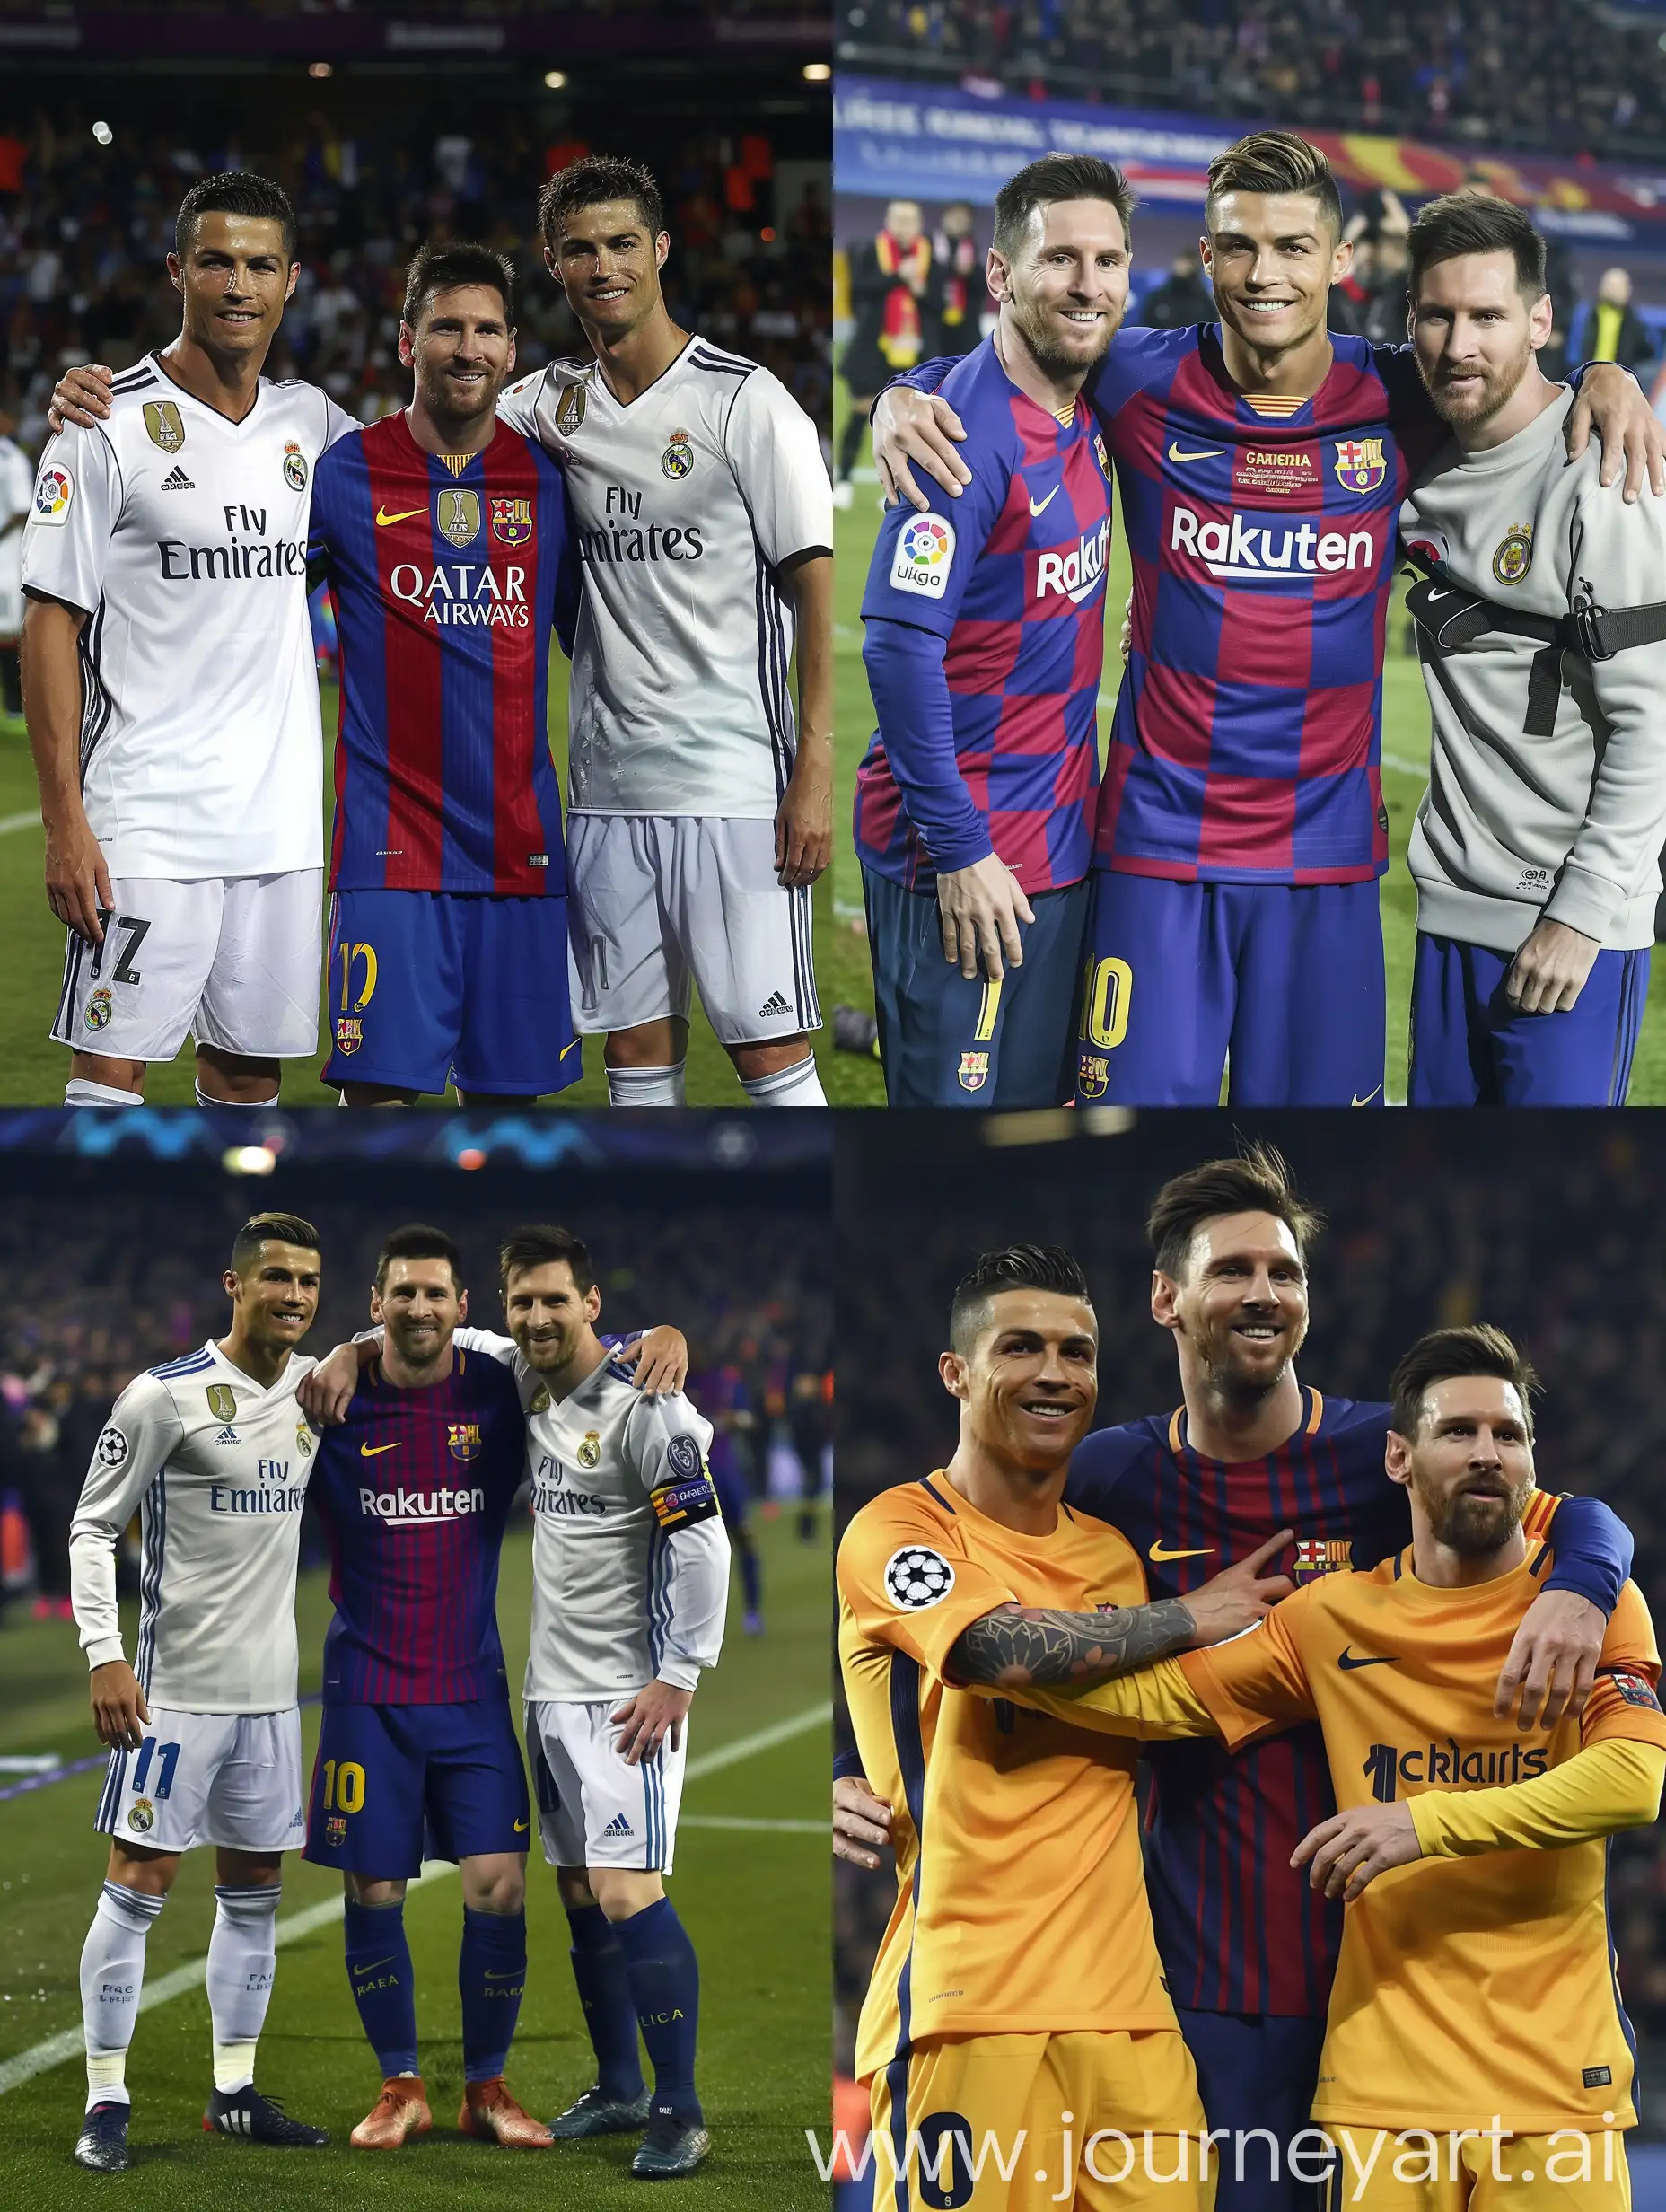 photo shot from a smartphone camera of crstiano ronaldo and lionel messi together with ciga rettes, night.